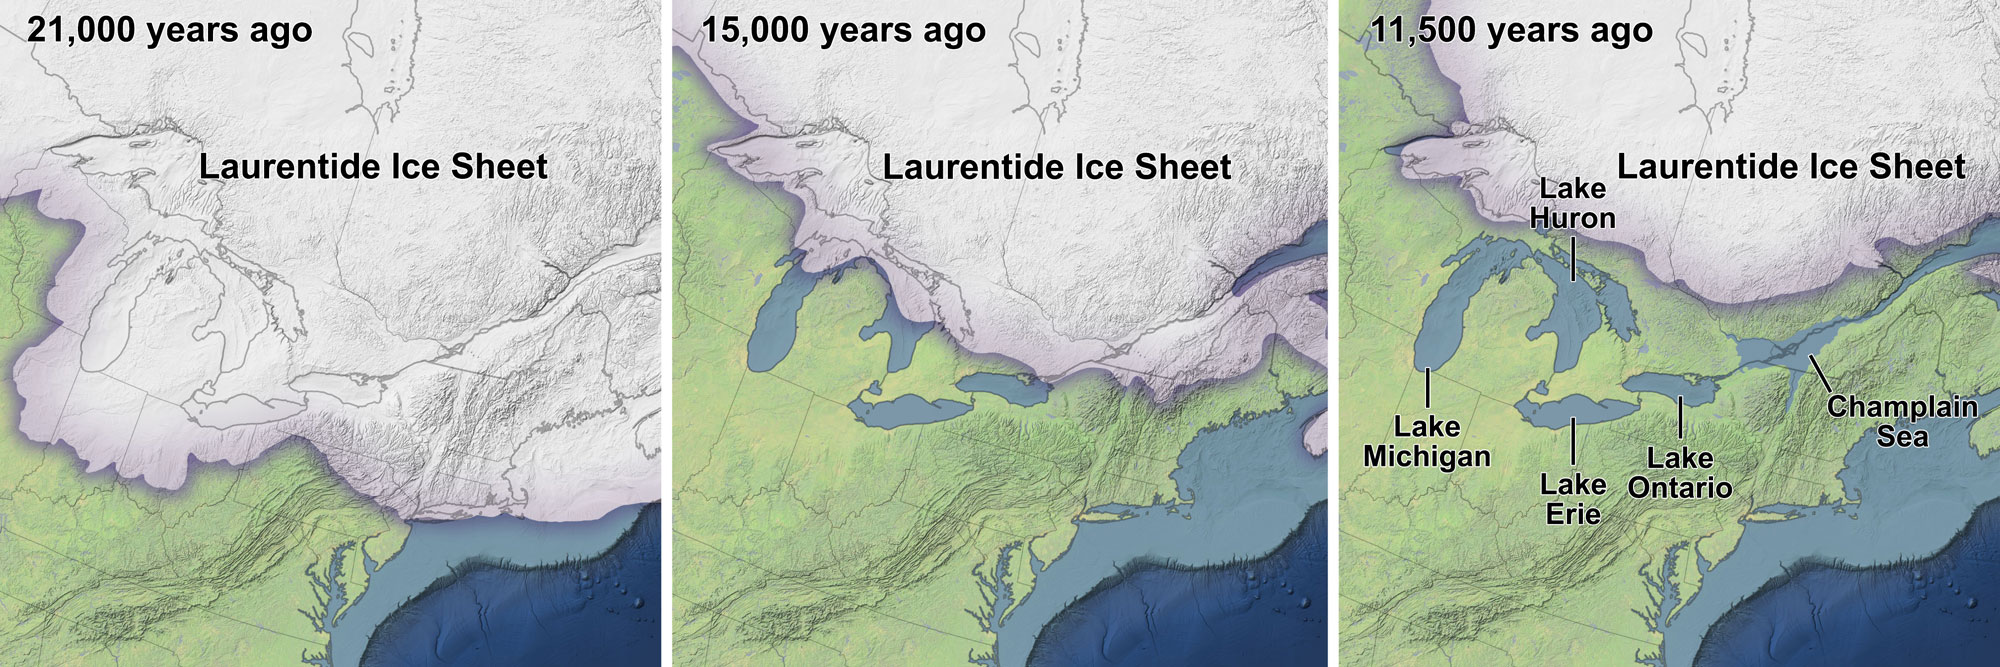 3-panel image of maps of the northeastern United States and southeastern Canada showing the Laurentide Ice Sheet at three different times. Panel 1: 21,000 years ago, the Laurentide Ice Sheet covered the northeast from central Minnesota to northern Illinois, Indiana, Ohio, Pennsylvania, and New Jersey. Panel 2: At 15,000 years ago, the Laurentide Ice Sheet had mostly retreated from the U.S., still covering the northernmost parts of the Great Lakes region to northern Maine. Panel 3: At 11,500 years ago, the Laurentide Ice Sheet still covered Lake Superior, but was otherwise absent from the Great Lakes and the U.S. in general. Due to the low elevation of the crust, the Champlain Sea extended toward Lake Ontario.